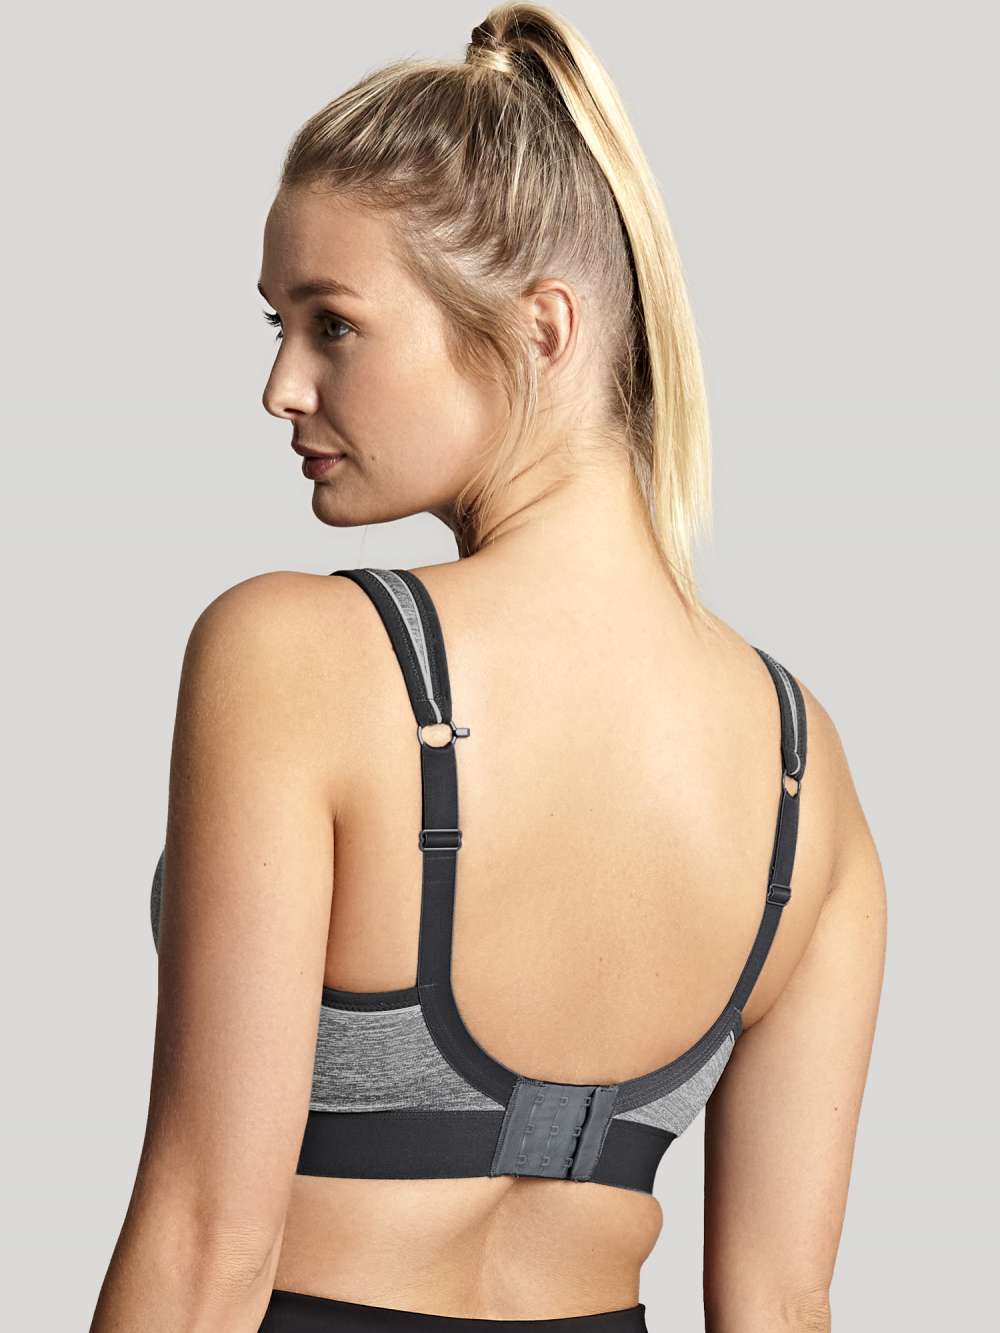 Non Wired Sports Bra - Charcoal Marl worn by model back view